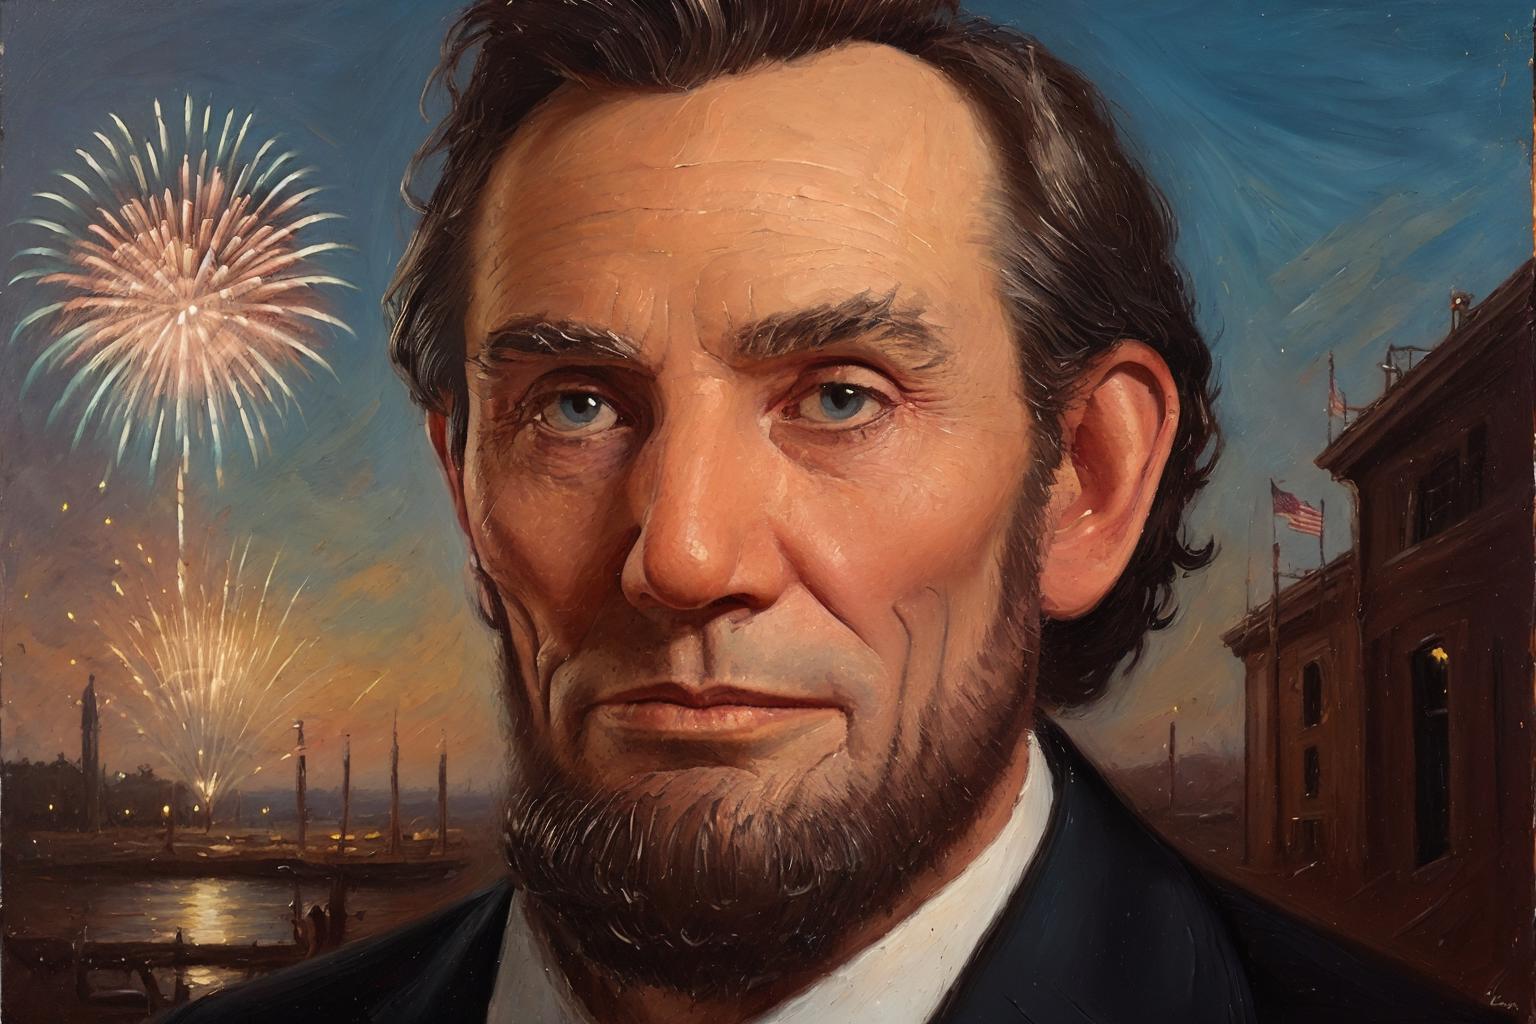 Abraham Lincoln image by rjox